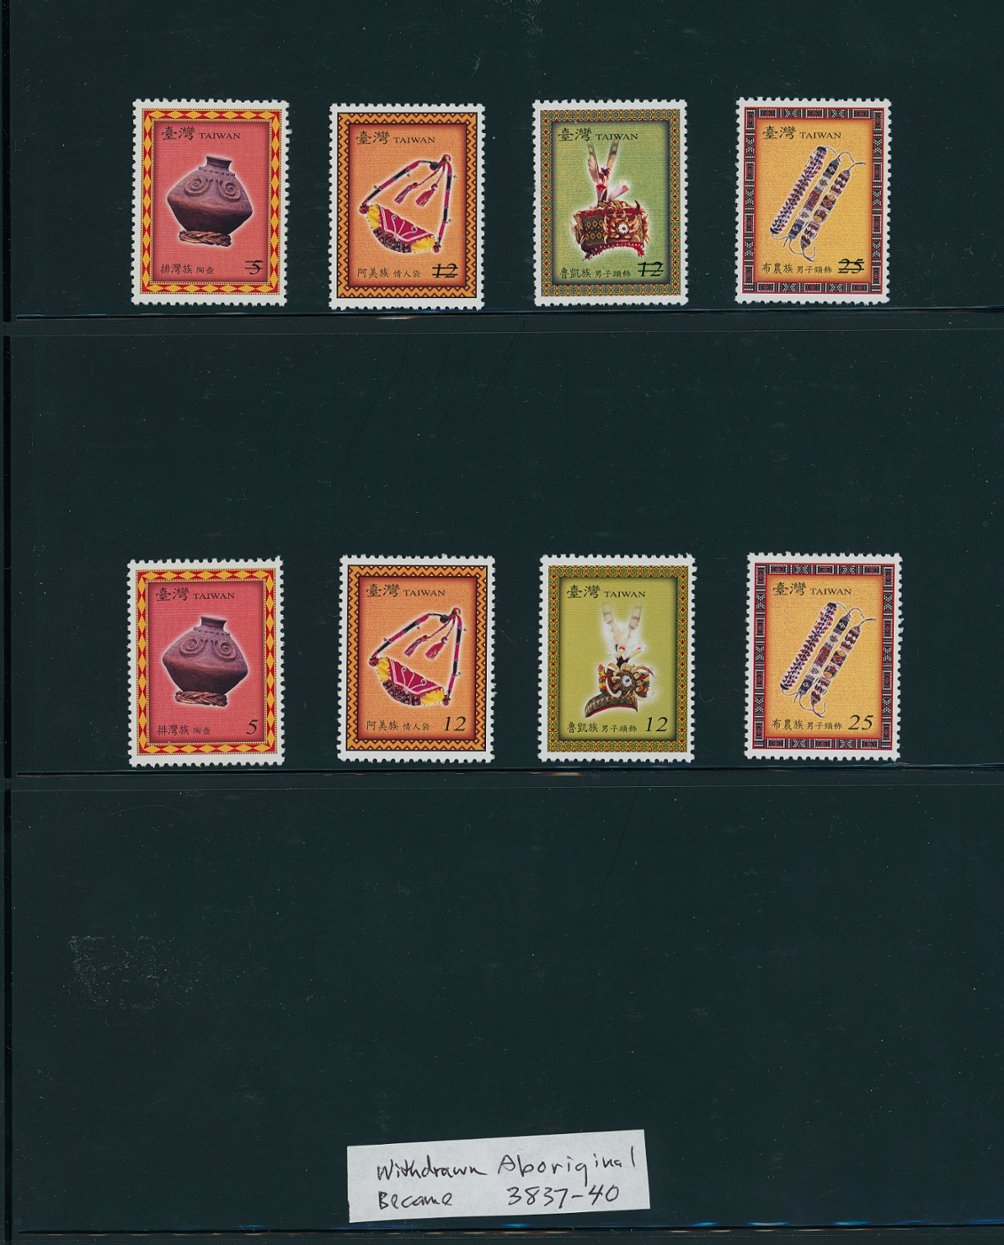 3837-3840 with withdrawn error stamp (third stamp) as Specimens and a set as finally issued for comparison